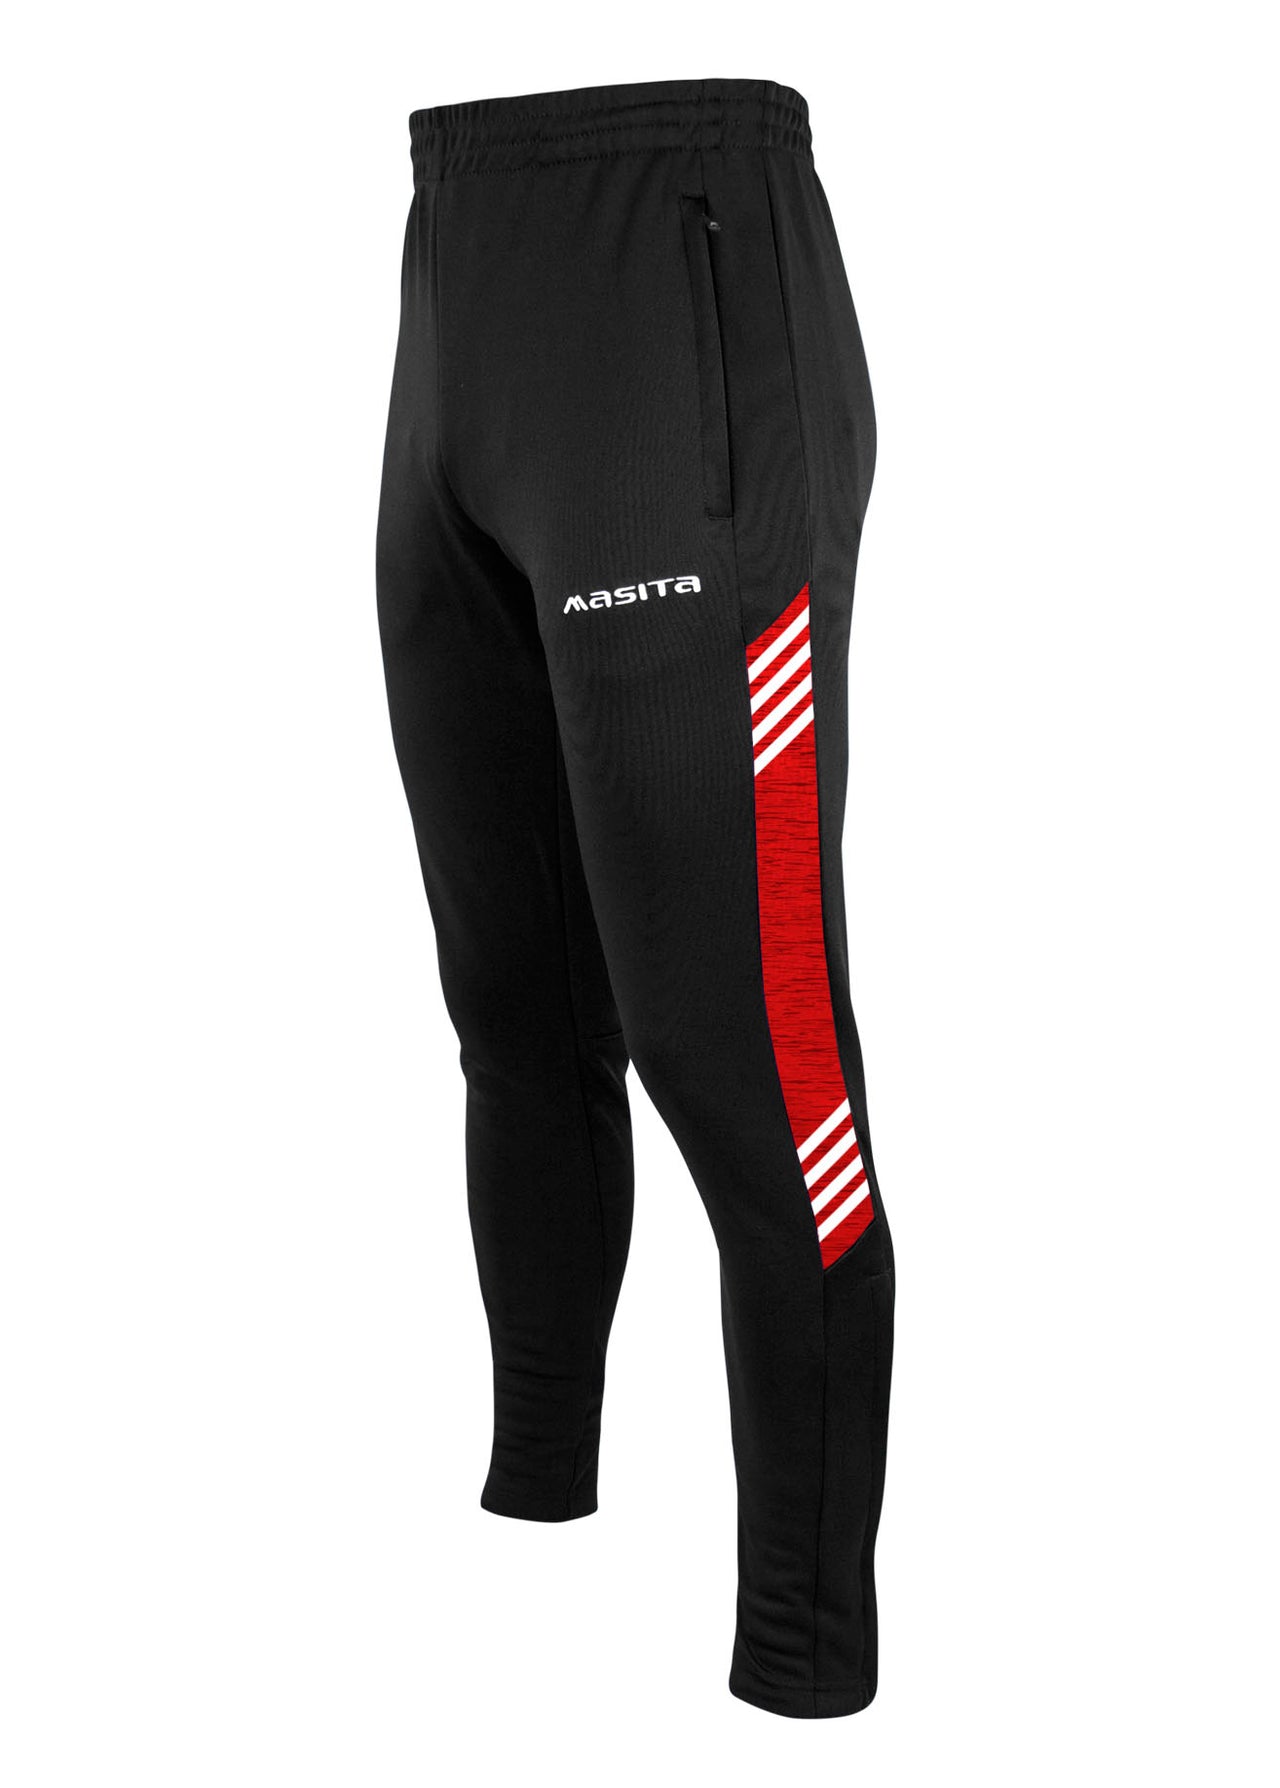 Hydro Skinny Bottoms Black/Red/White Adult